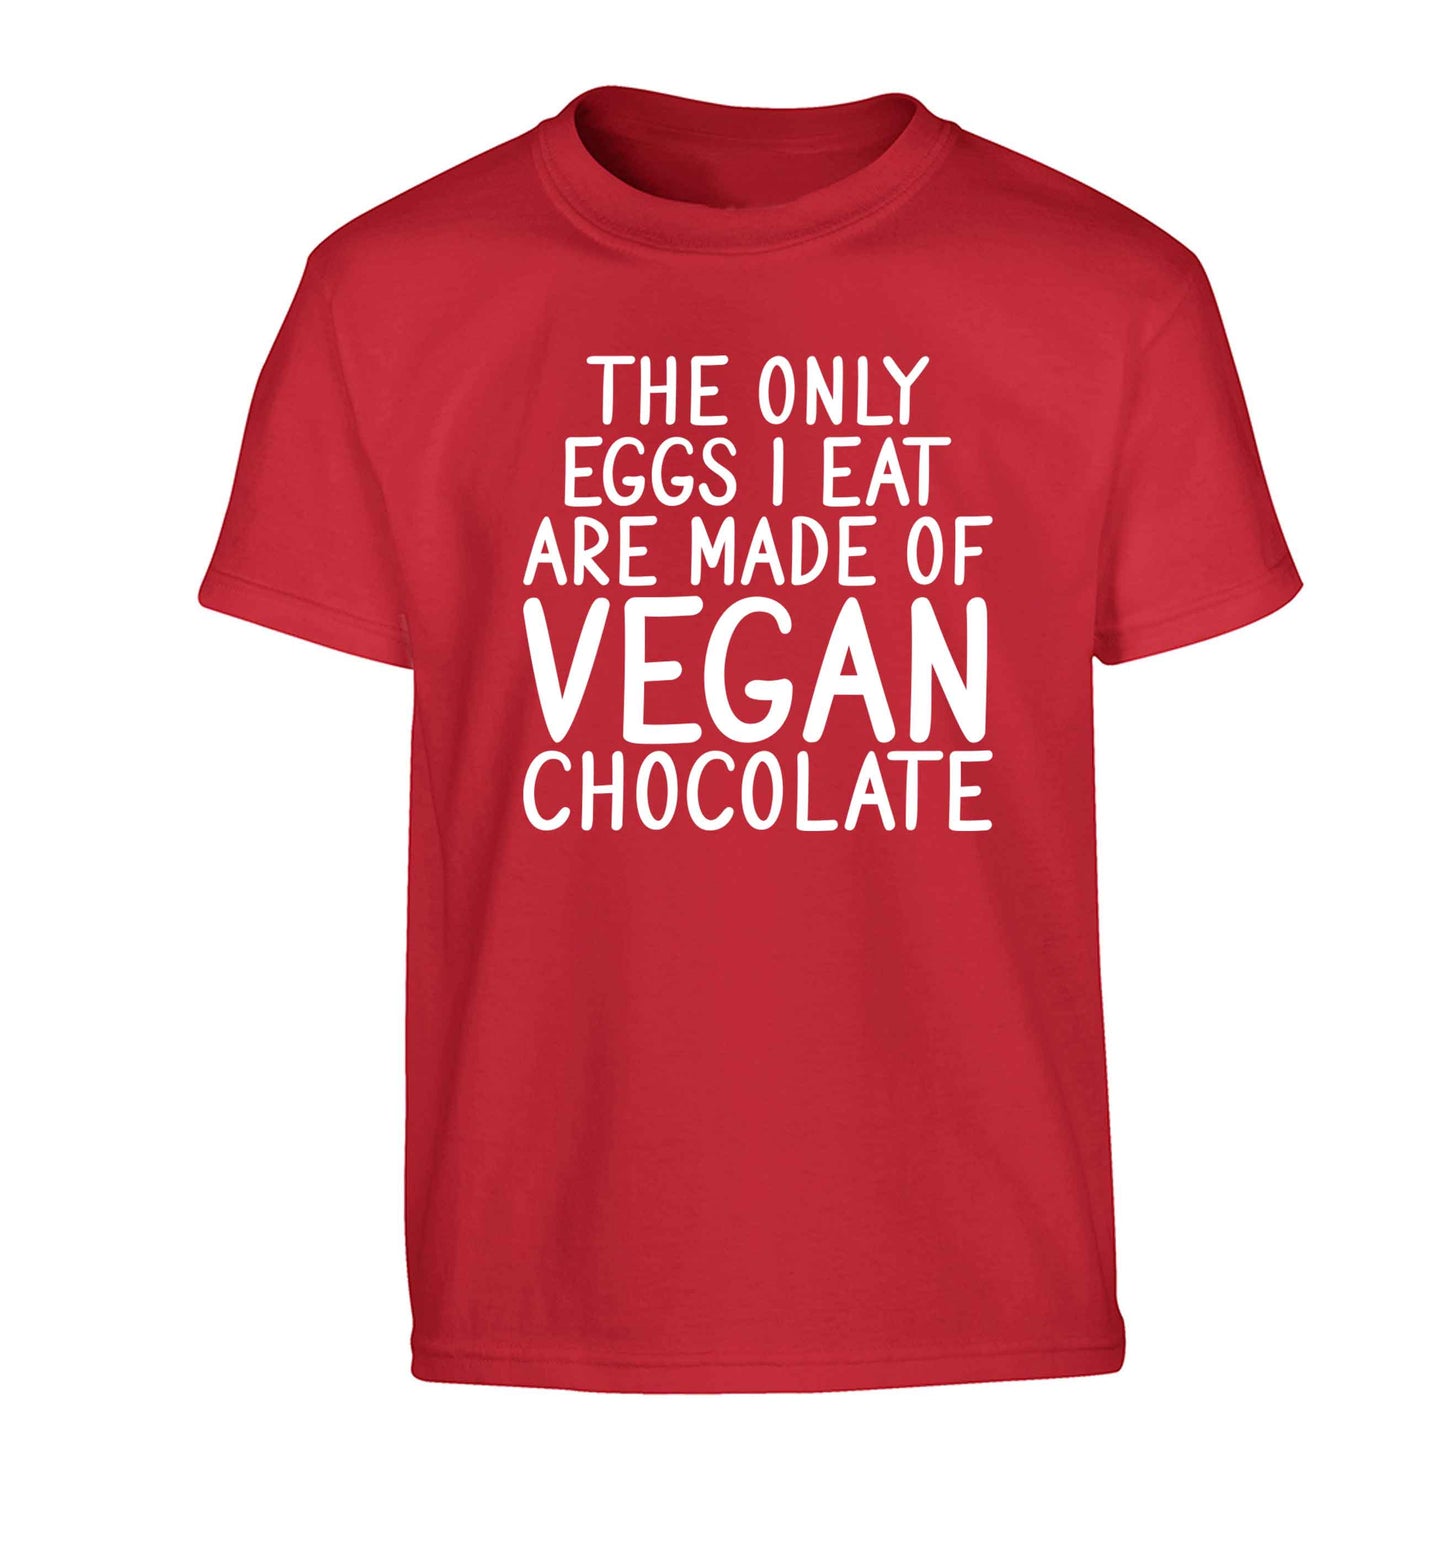 The only eggs I eat are made of vegan chocolate Children's red Tshirt 12-13 Years